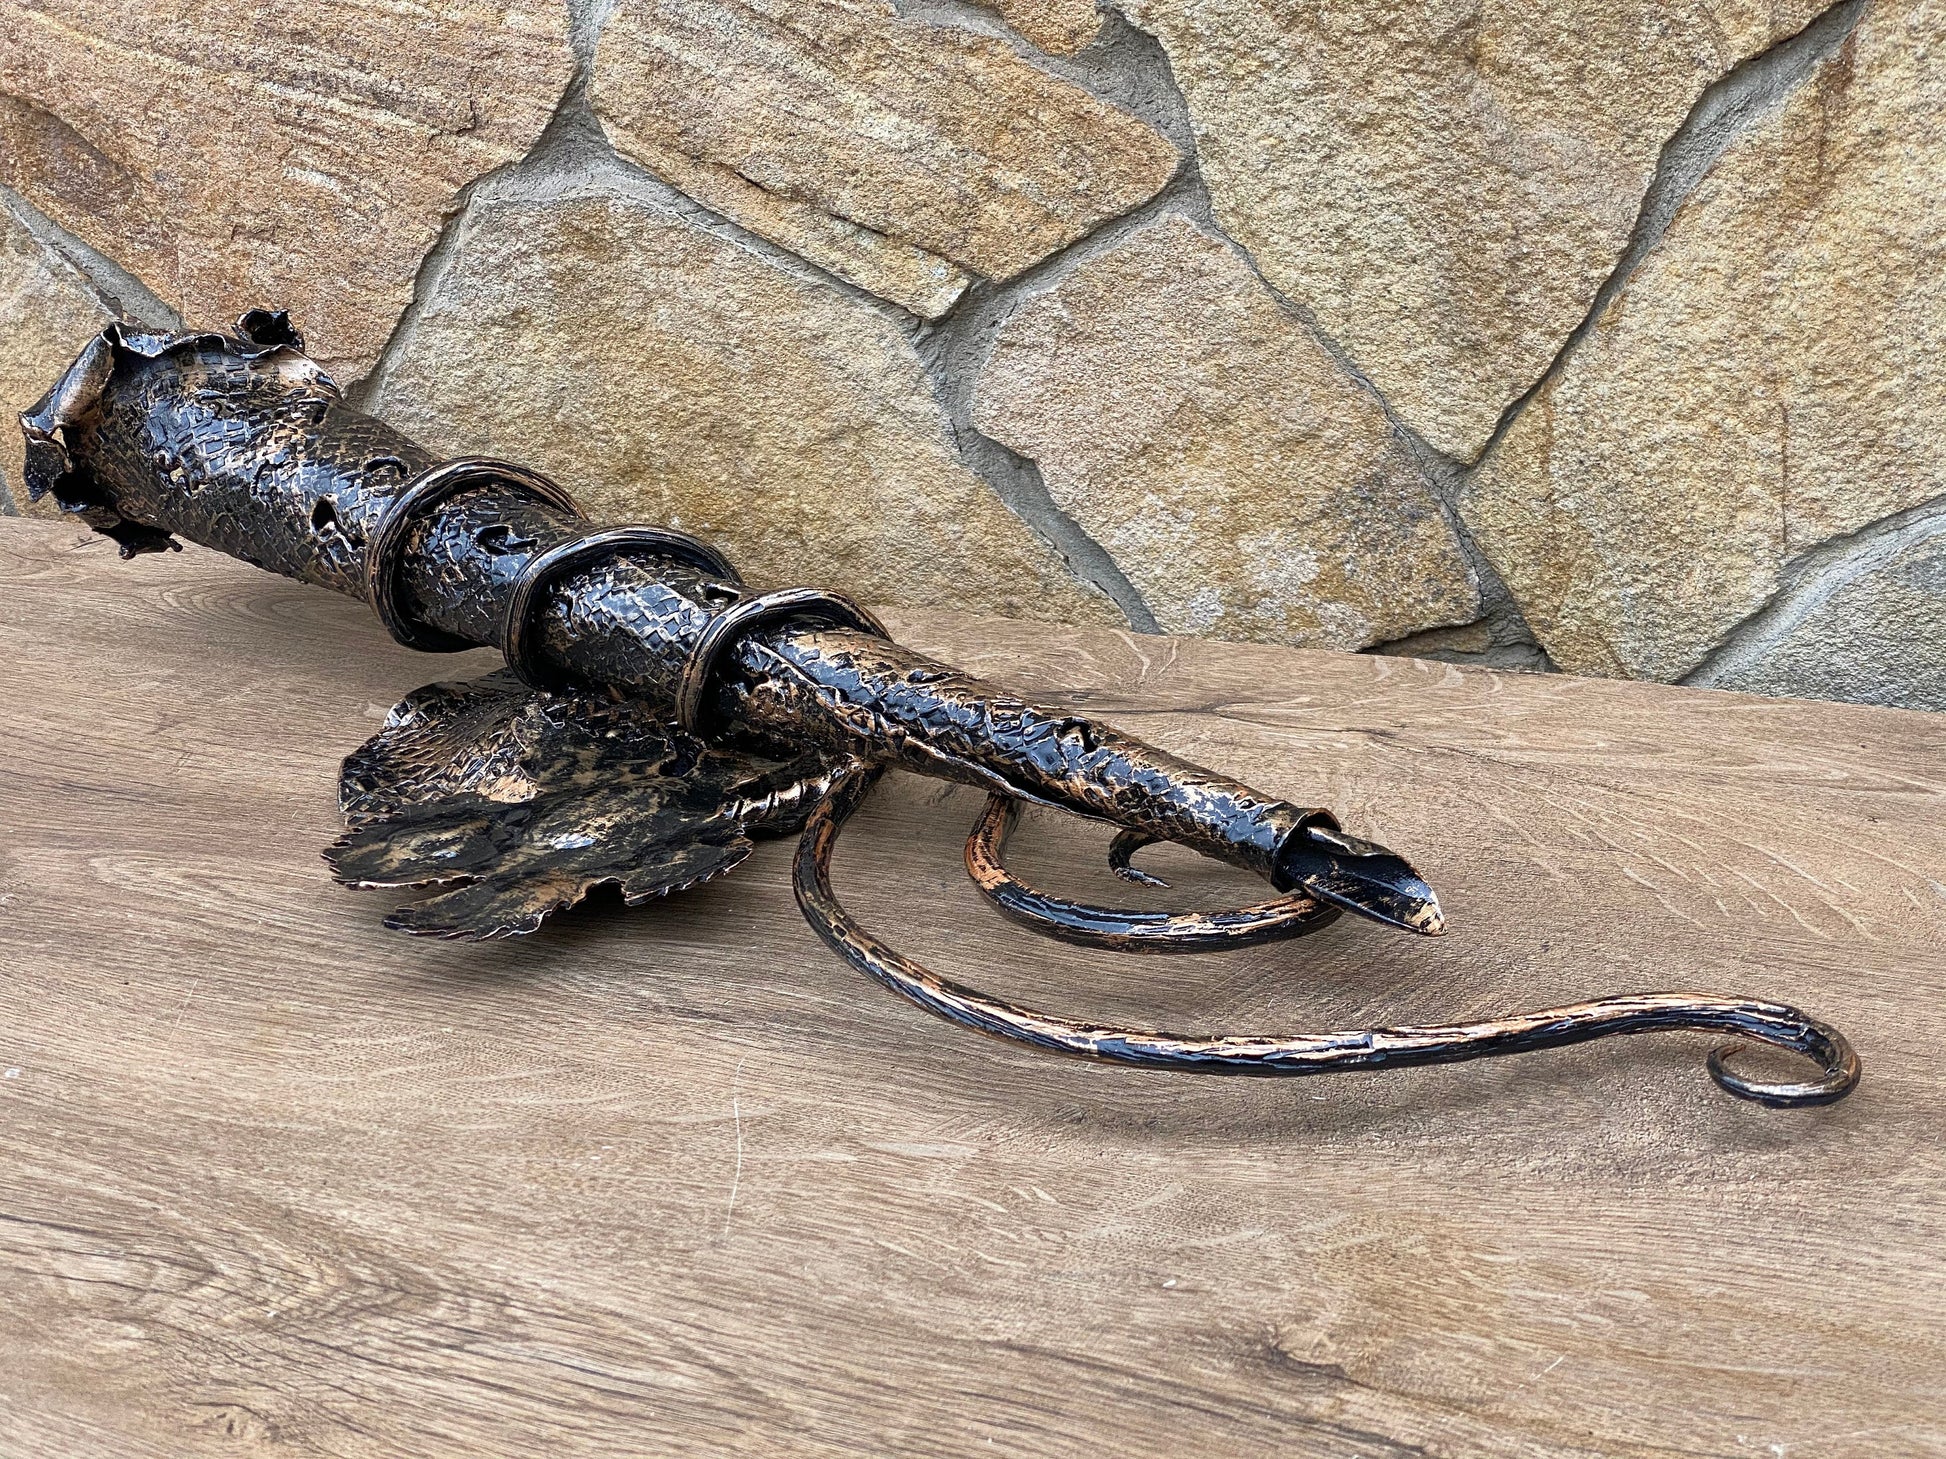 Torch, wall sconce, candle holder, iron gift, restaurant lamp, Christmas, anniversary, birthday, torch sconce,medieval,viking,lighting decor